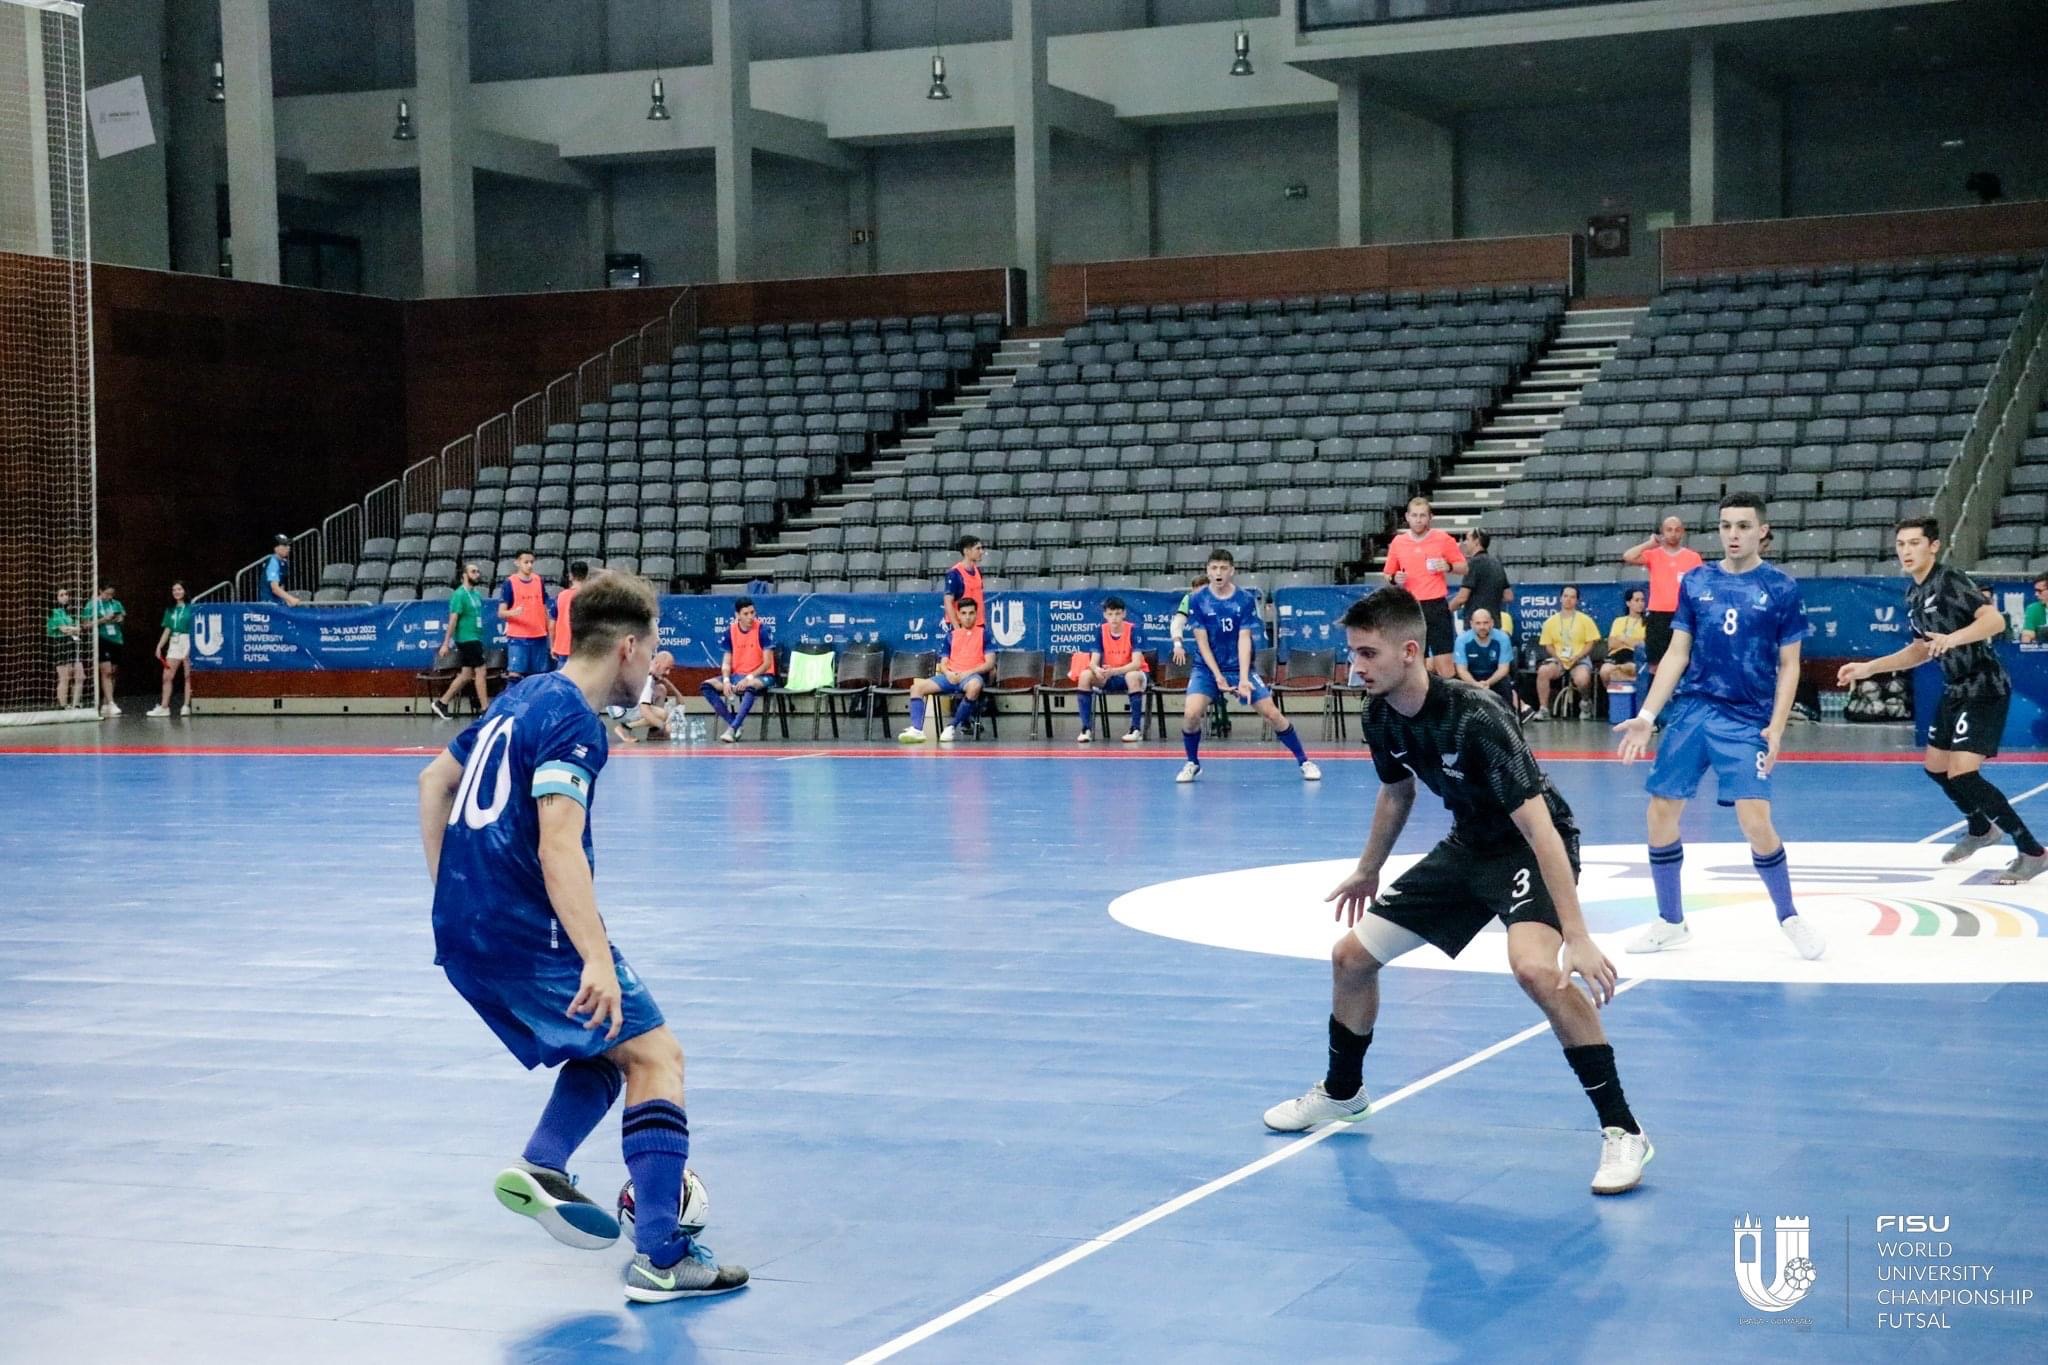 Hamish Grey, the first professional futsal player from New Zealand